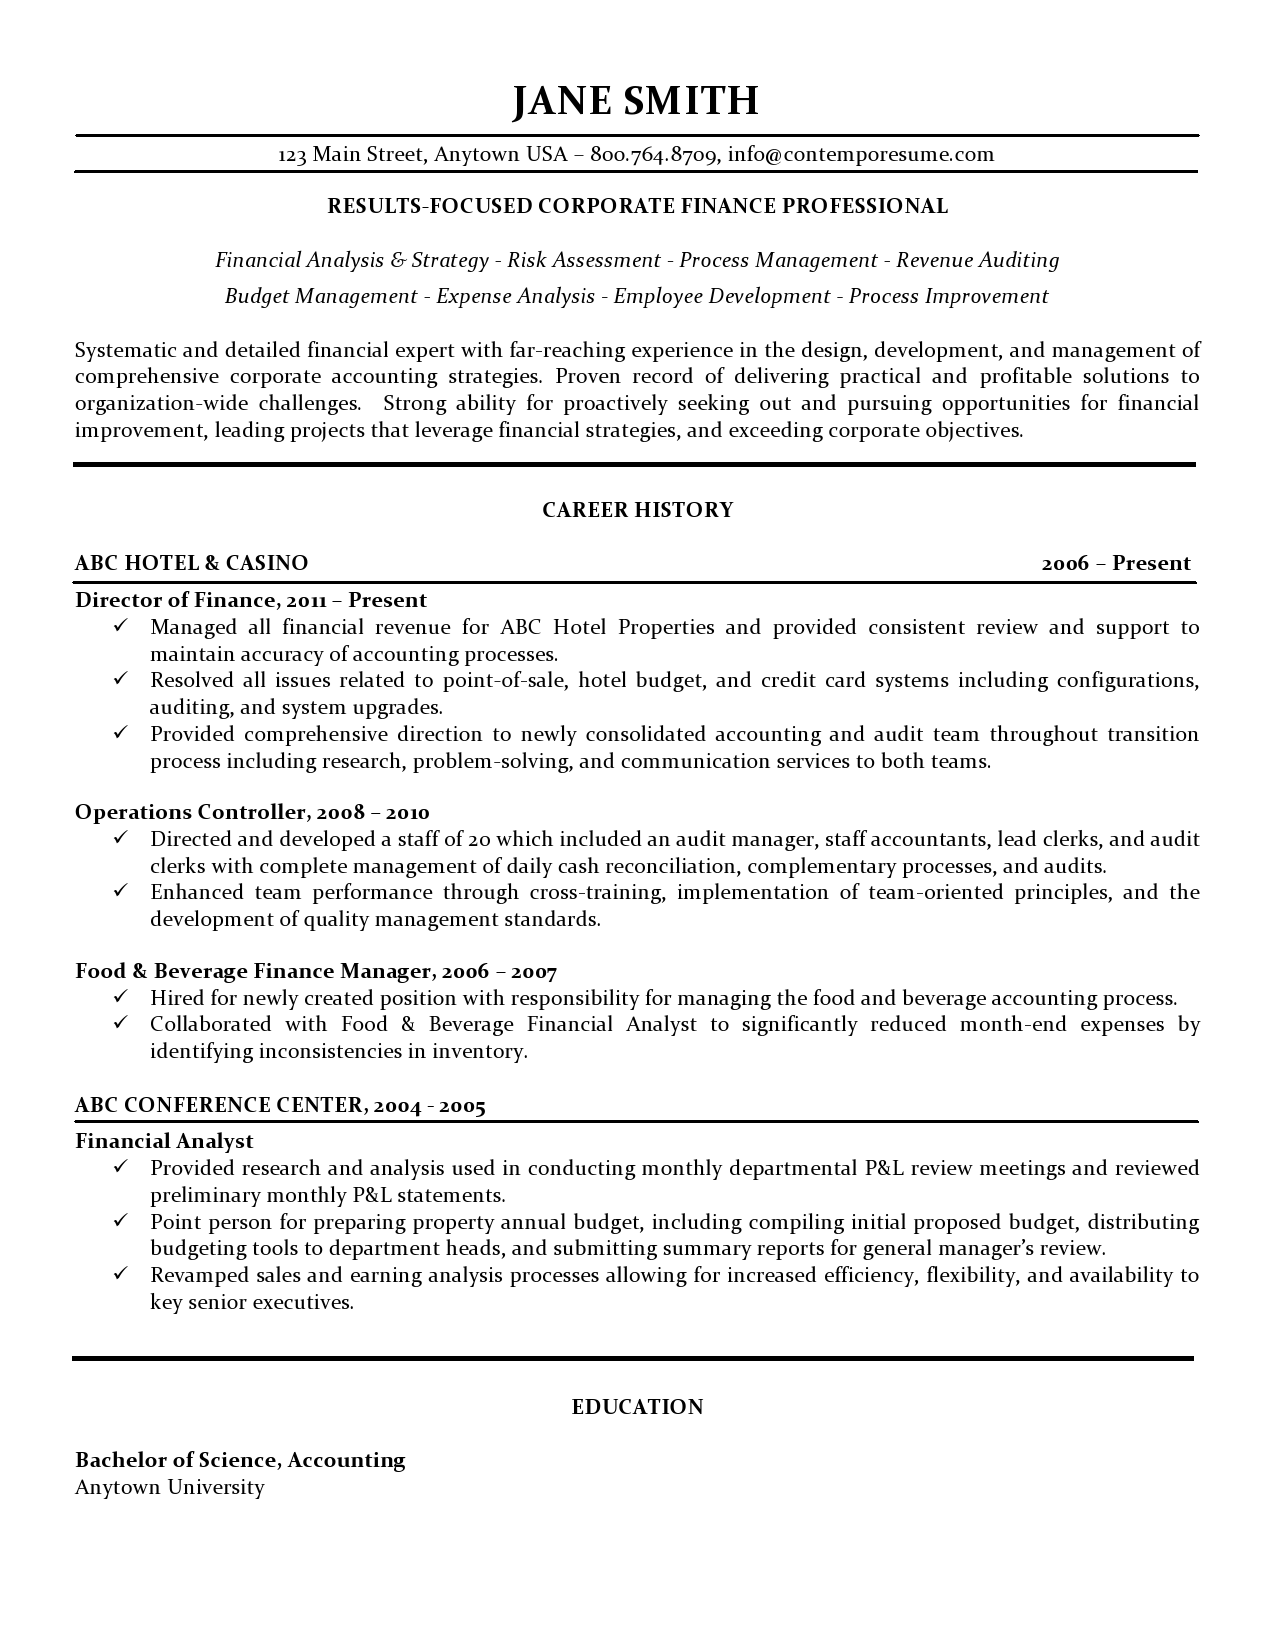 Sample Resume for Experienced Finance Executive Corporate Finance Executive Resume